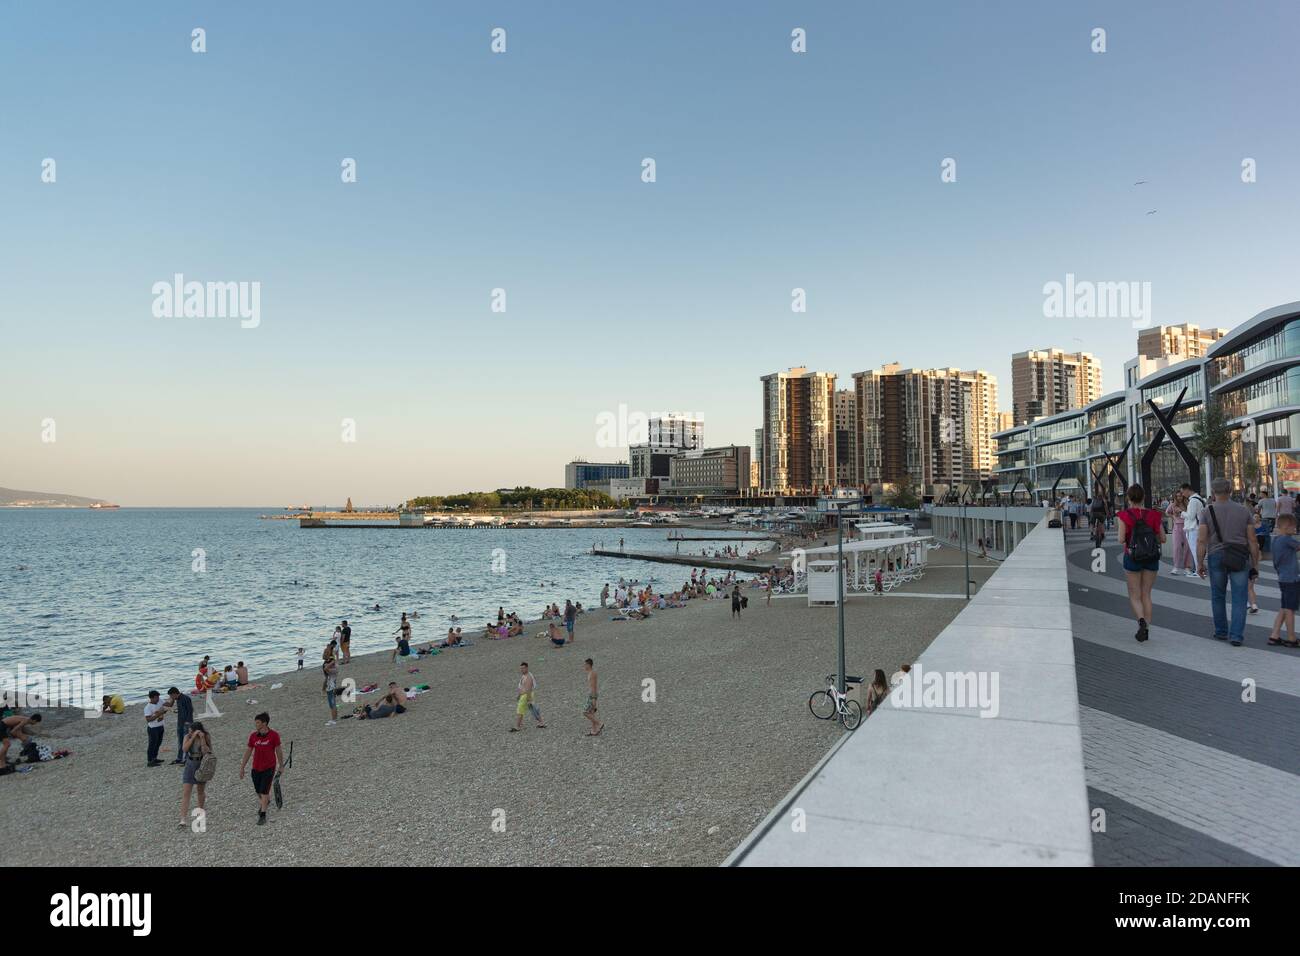 Russia, Novorossiysk, July 11, 2020: Evening embankment of Admiral Serebryakov and the Central beach of the black sea city. Citizens and guests relax Stock Photo